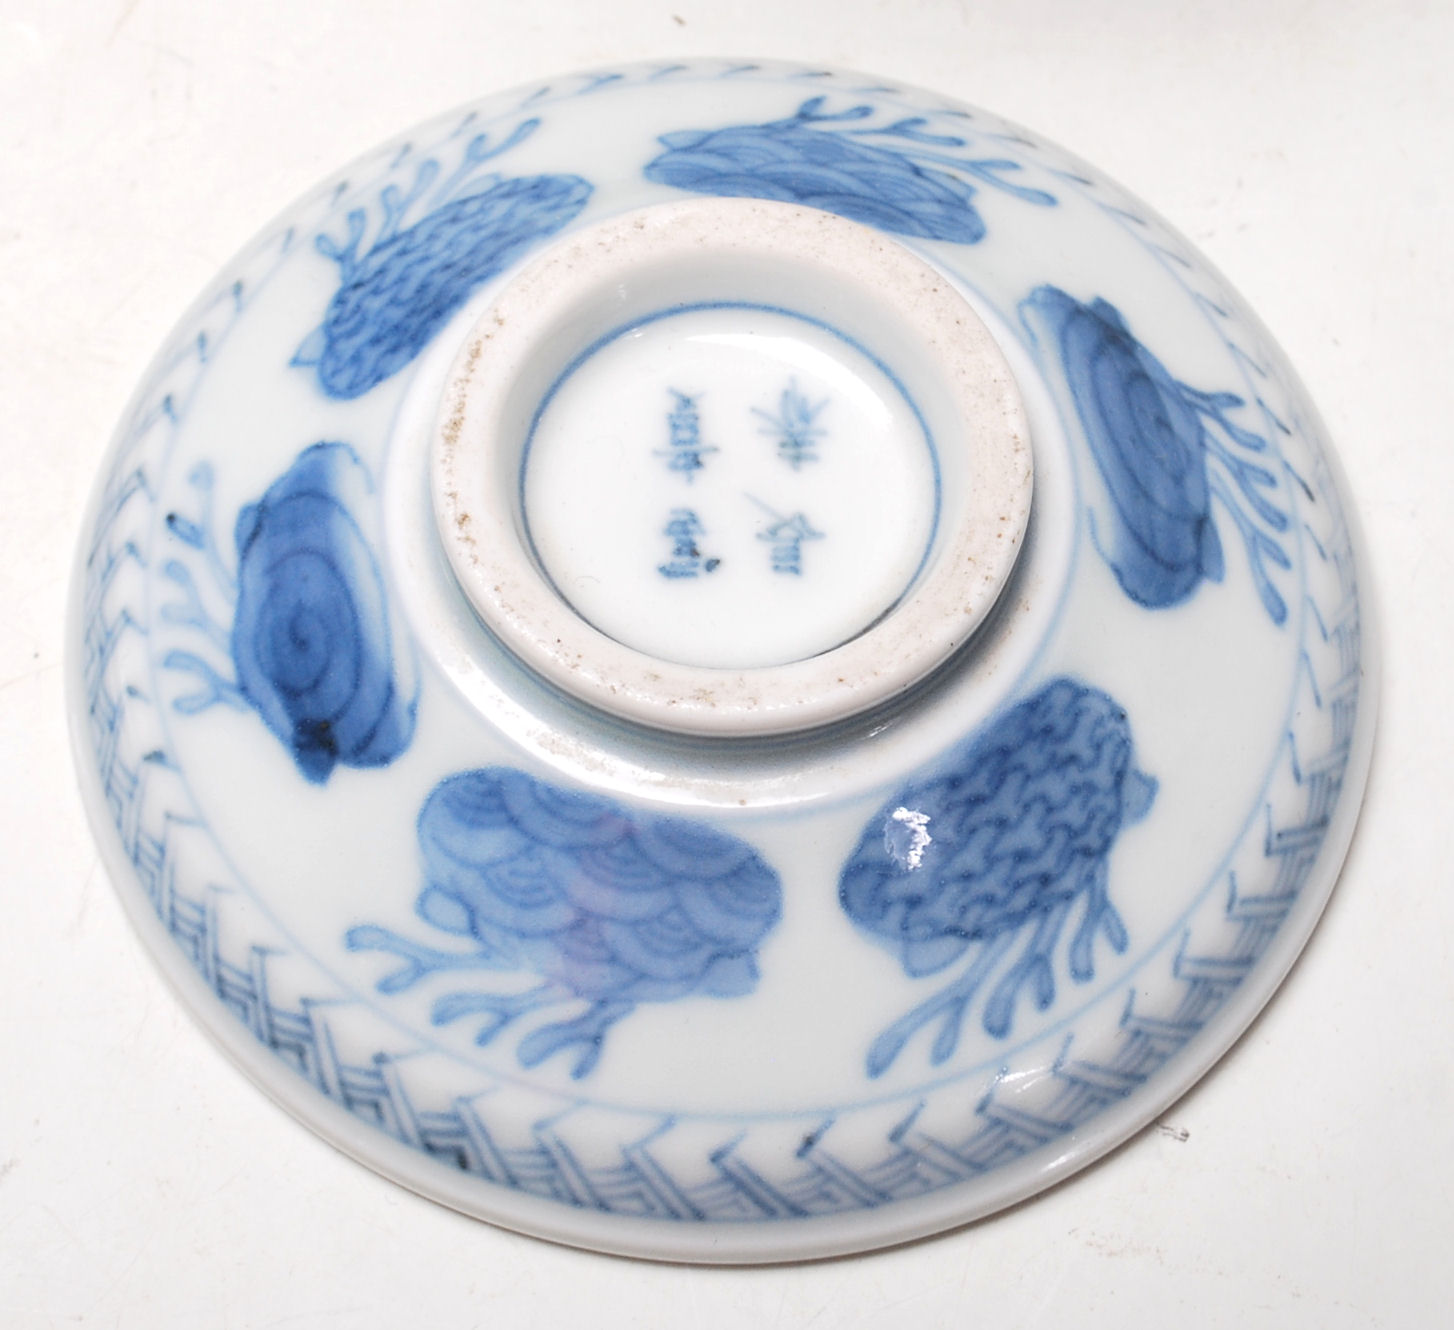 PAIR OF 19TH CENTURY MEIJI PERIOD JAPANESE / CHINESE STYLE BLUE AND WHITE BOWLS AND COVERS - Image 5 of 6